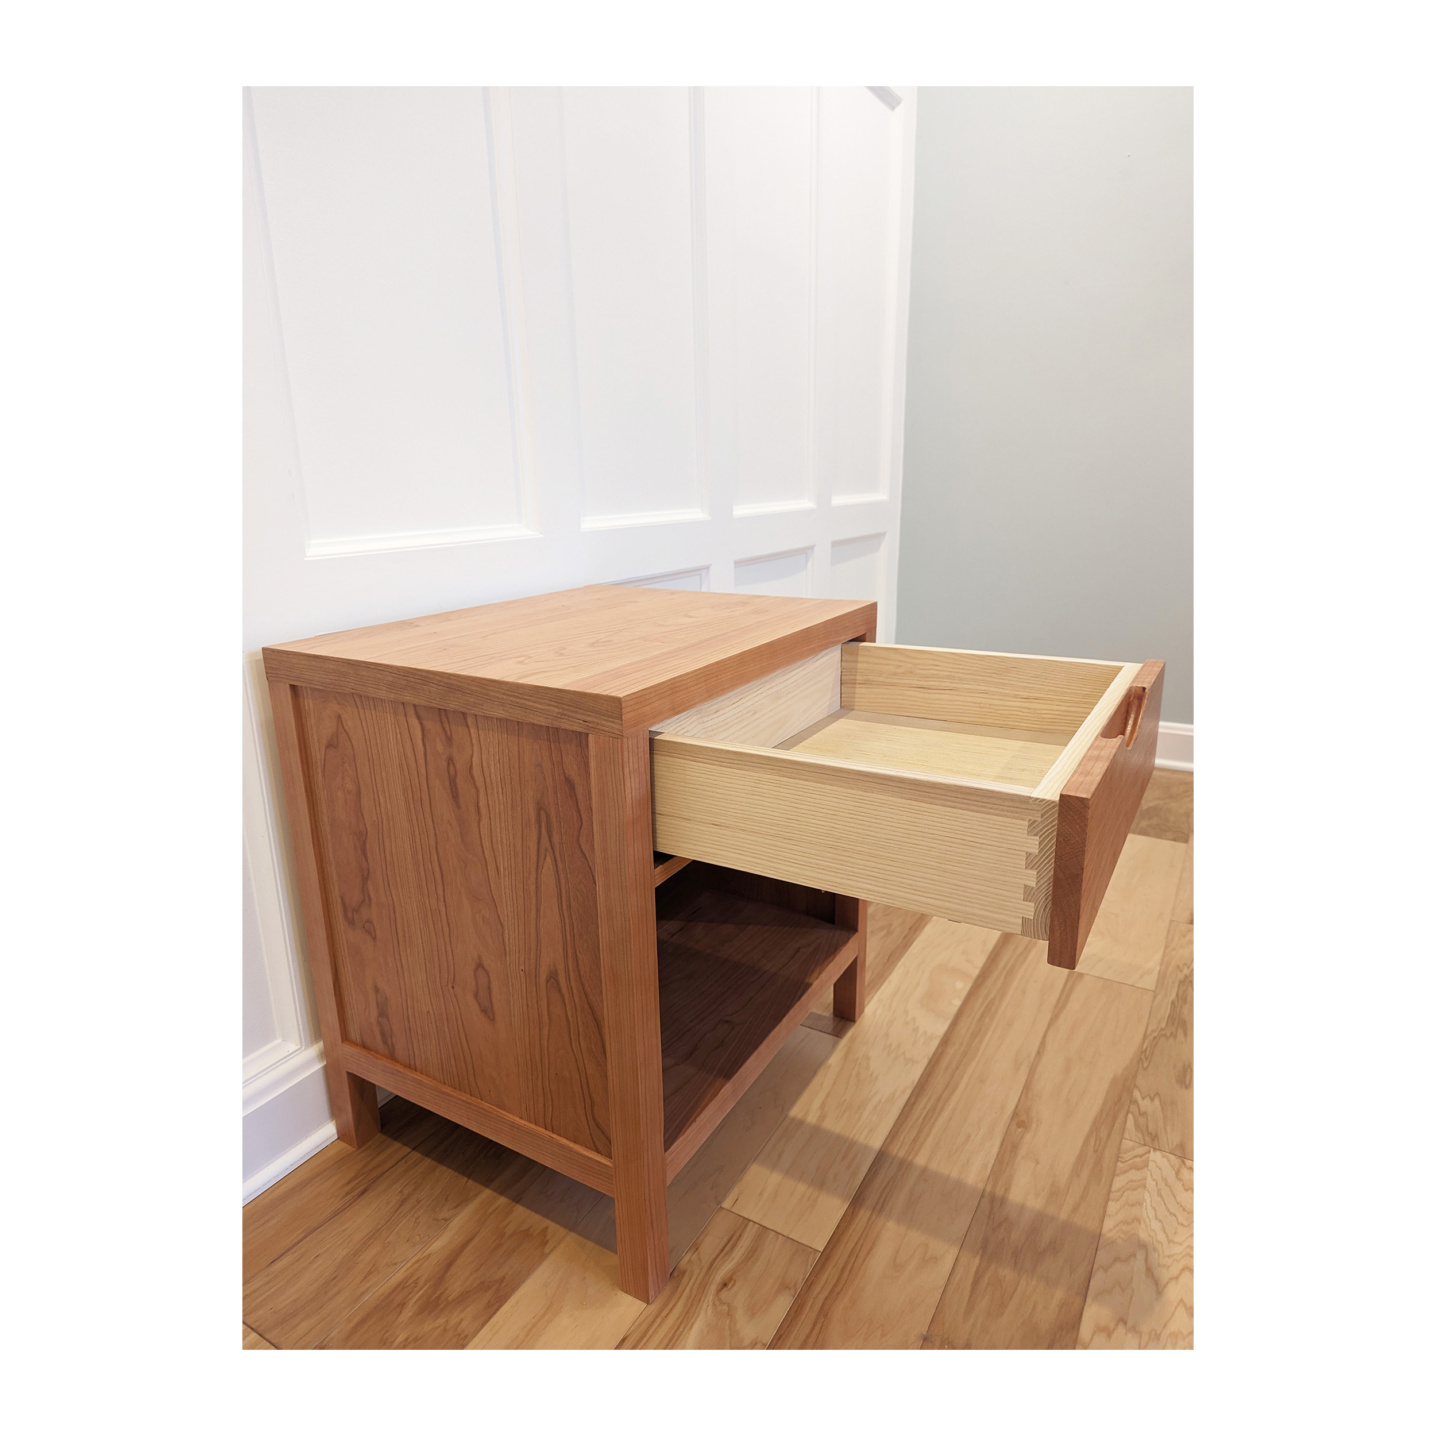 Nordic Nightstand made in solid wood with soft closing dovetail drawers using Ash wood--Made by 57NorthPlank Tailored Modern Furniture